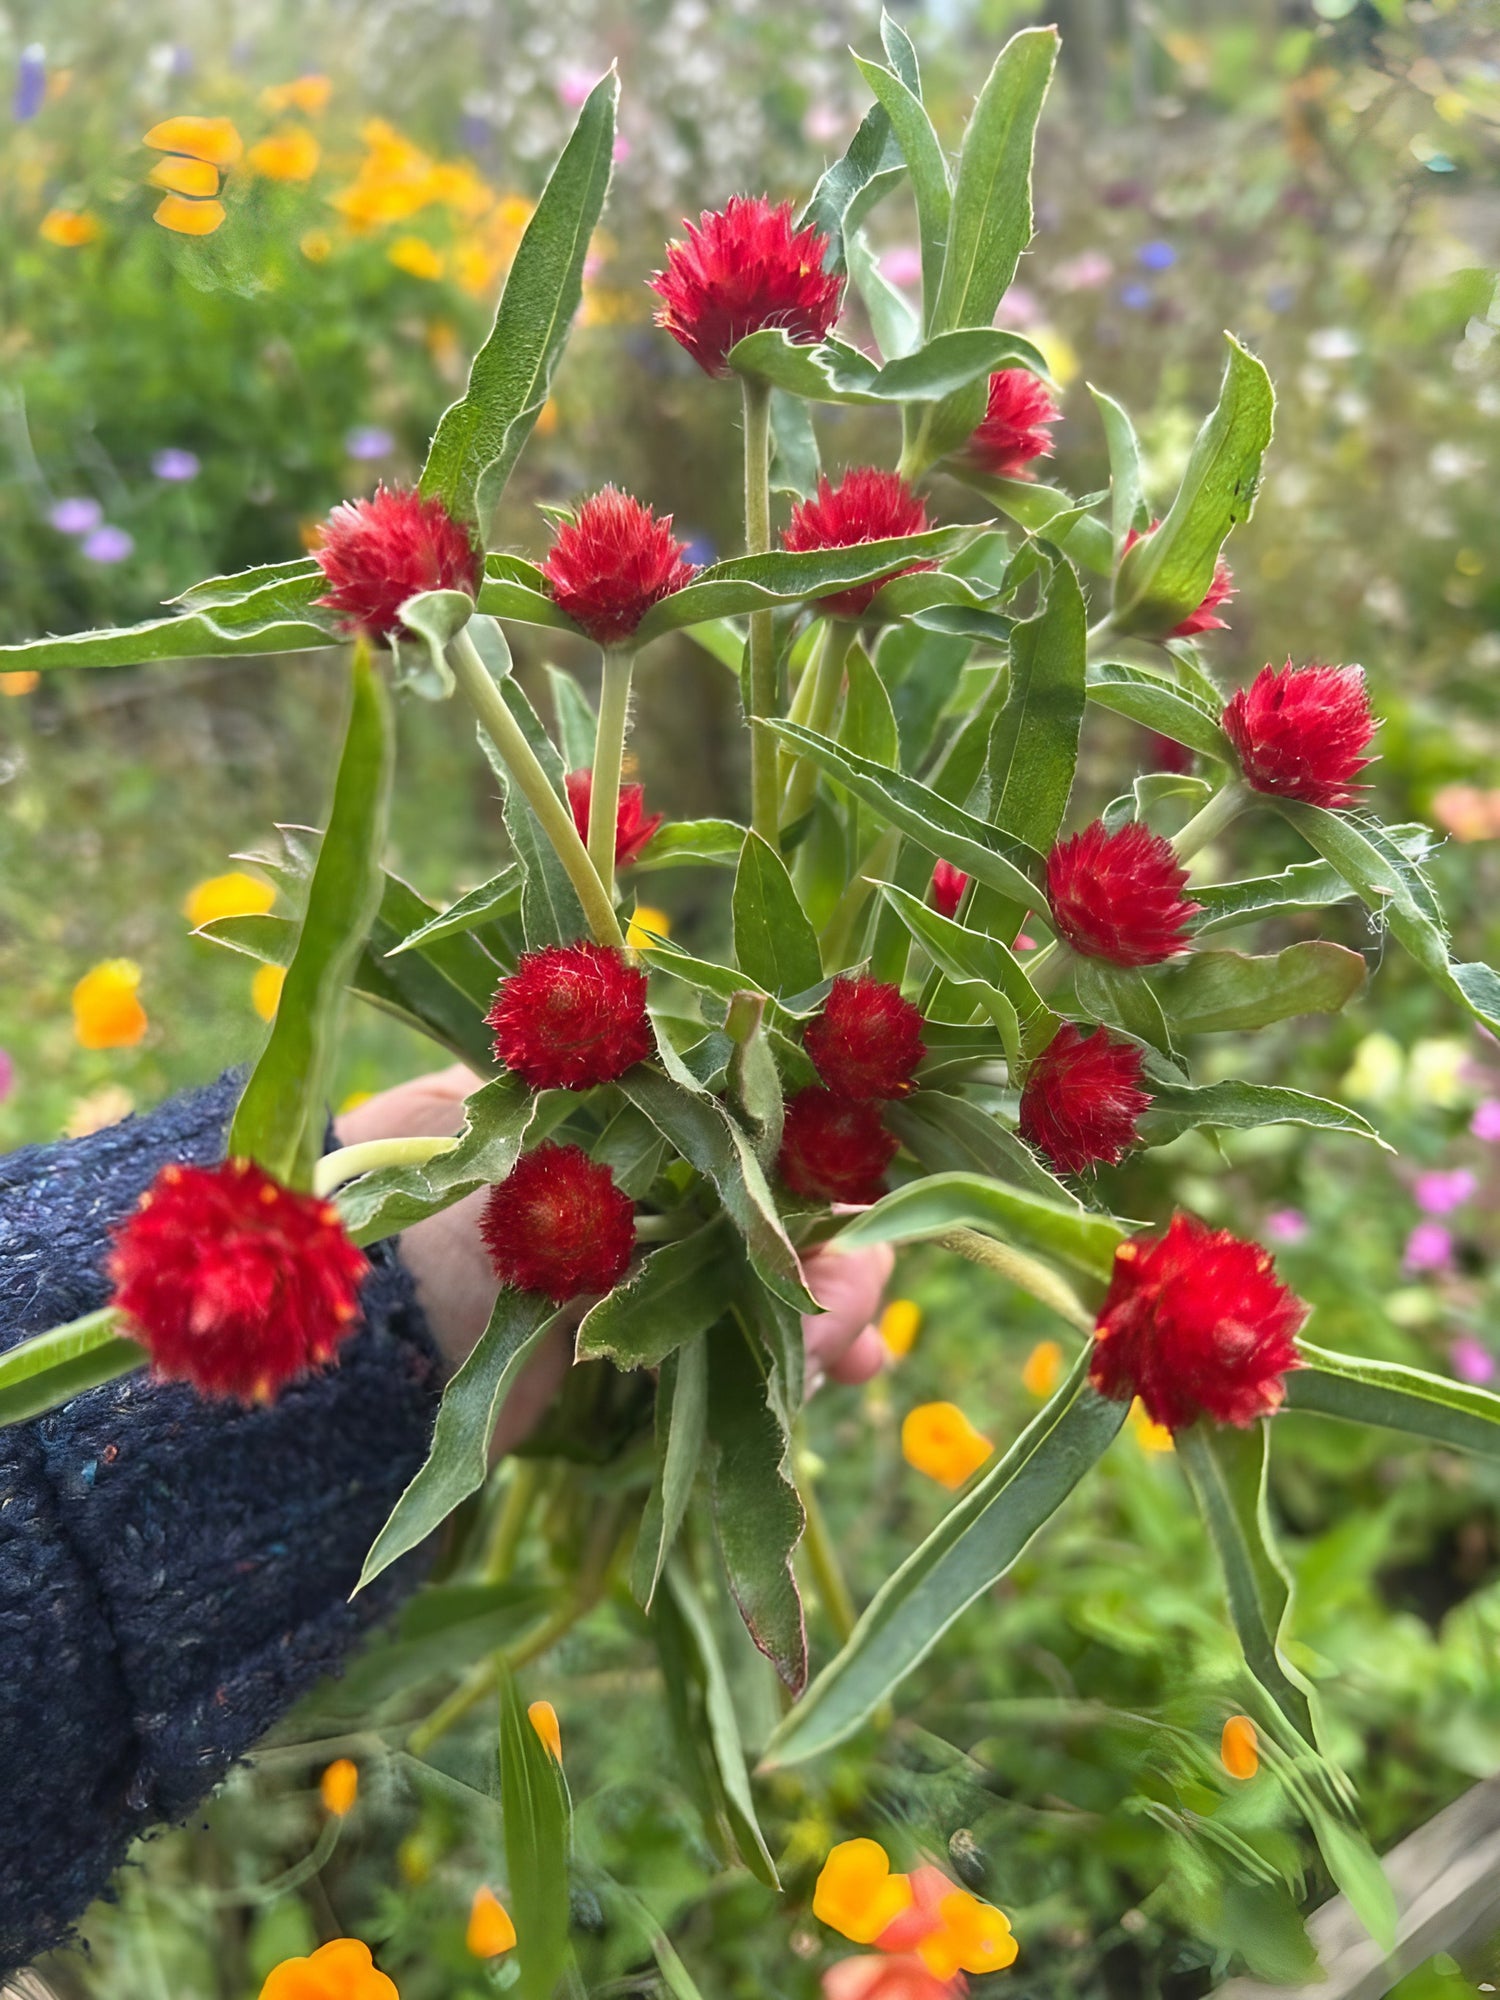 Individual holding a cluster of Gomphrena Strawberry Fields flowers with red globular heads